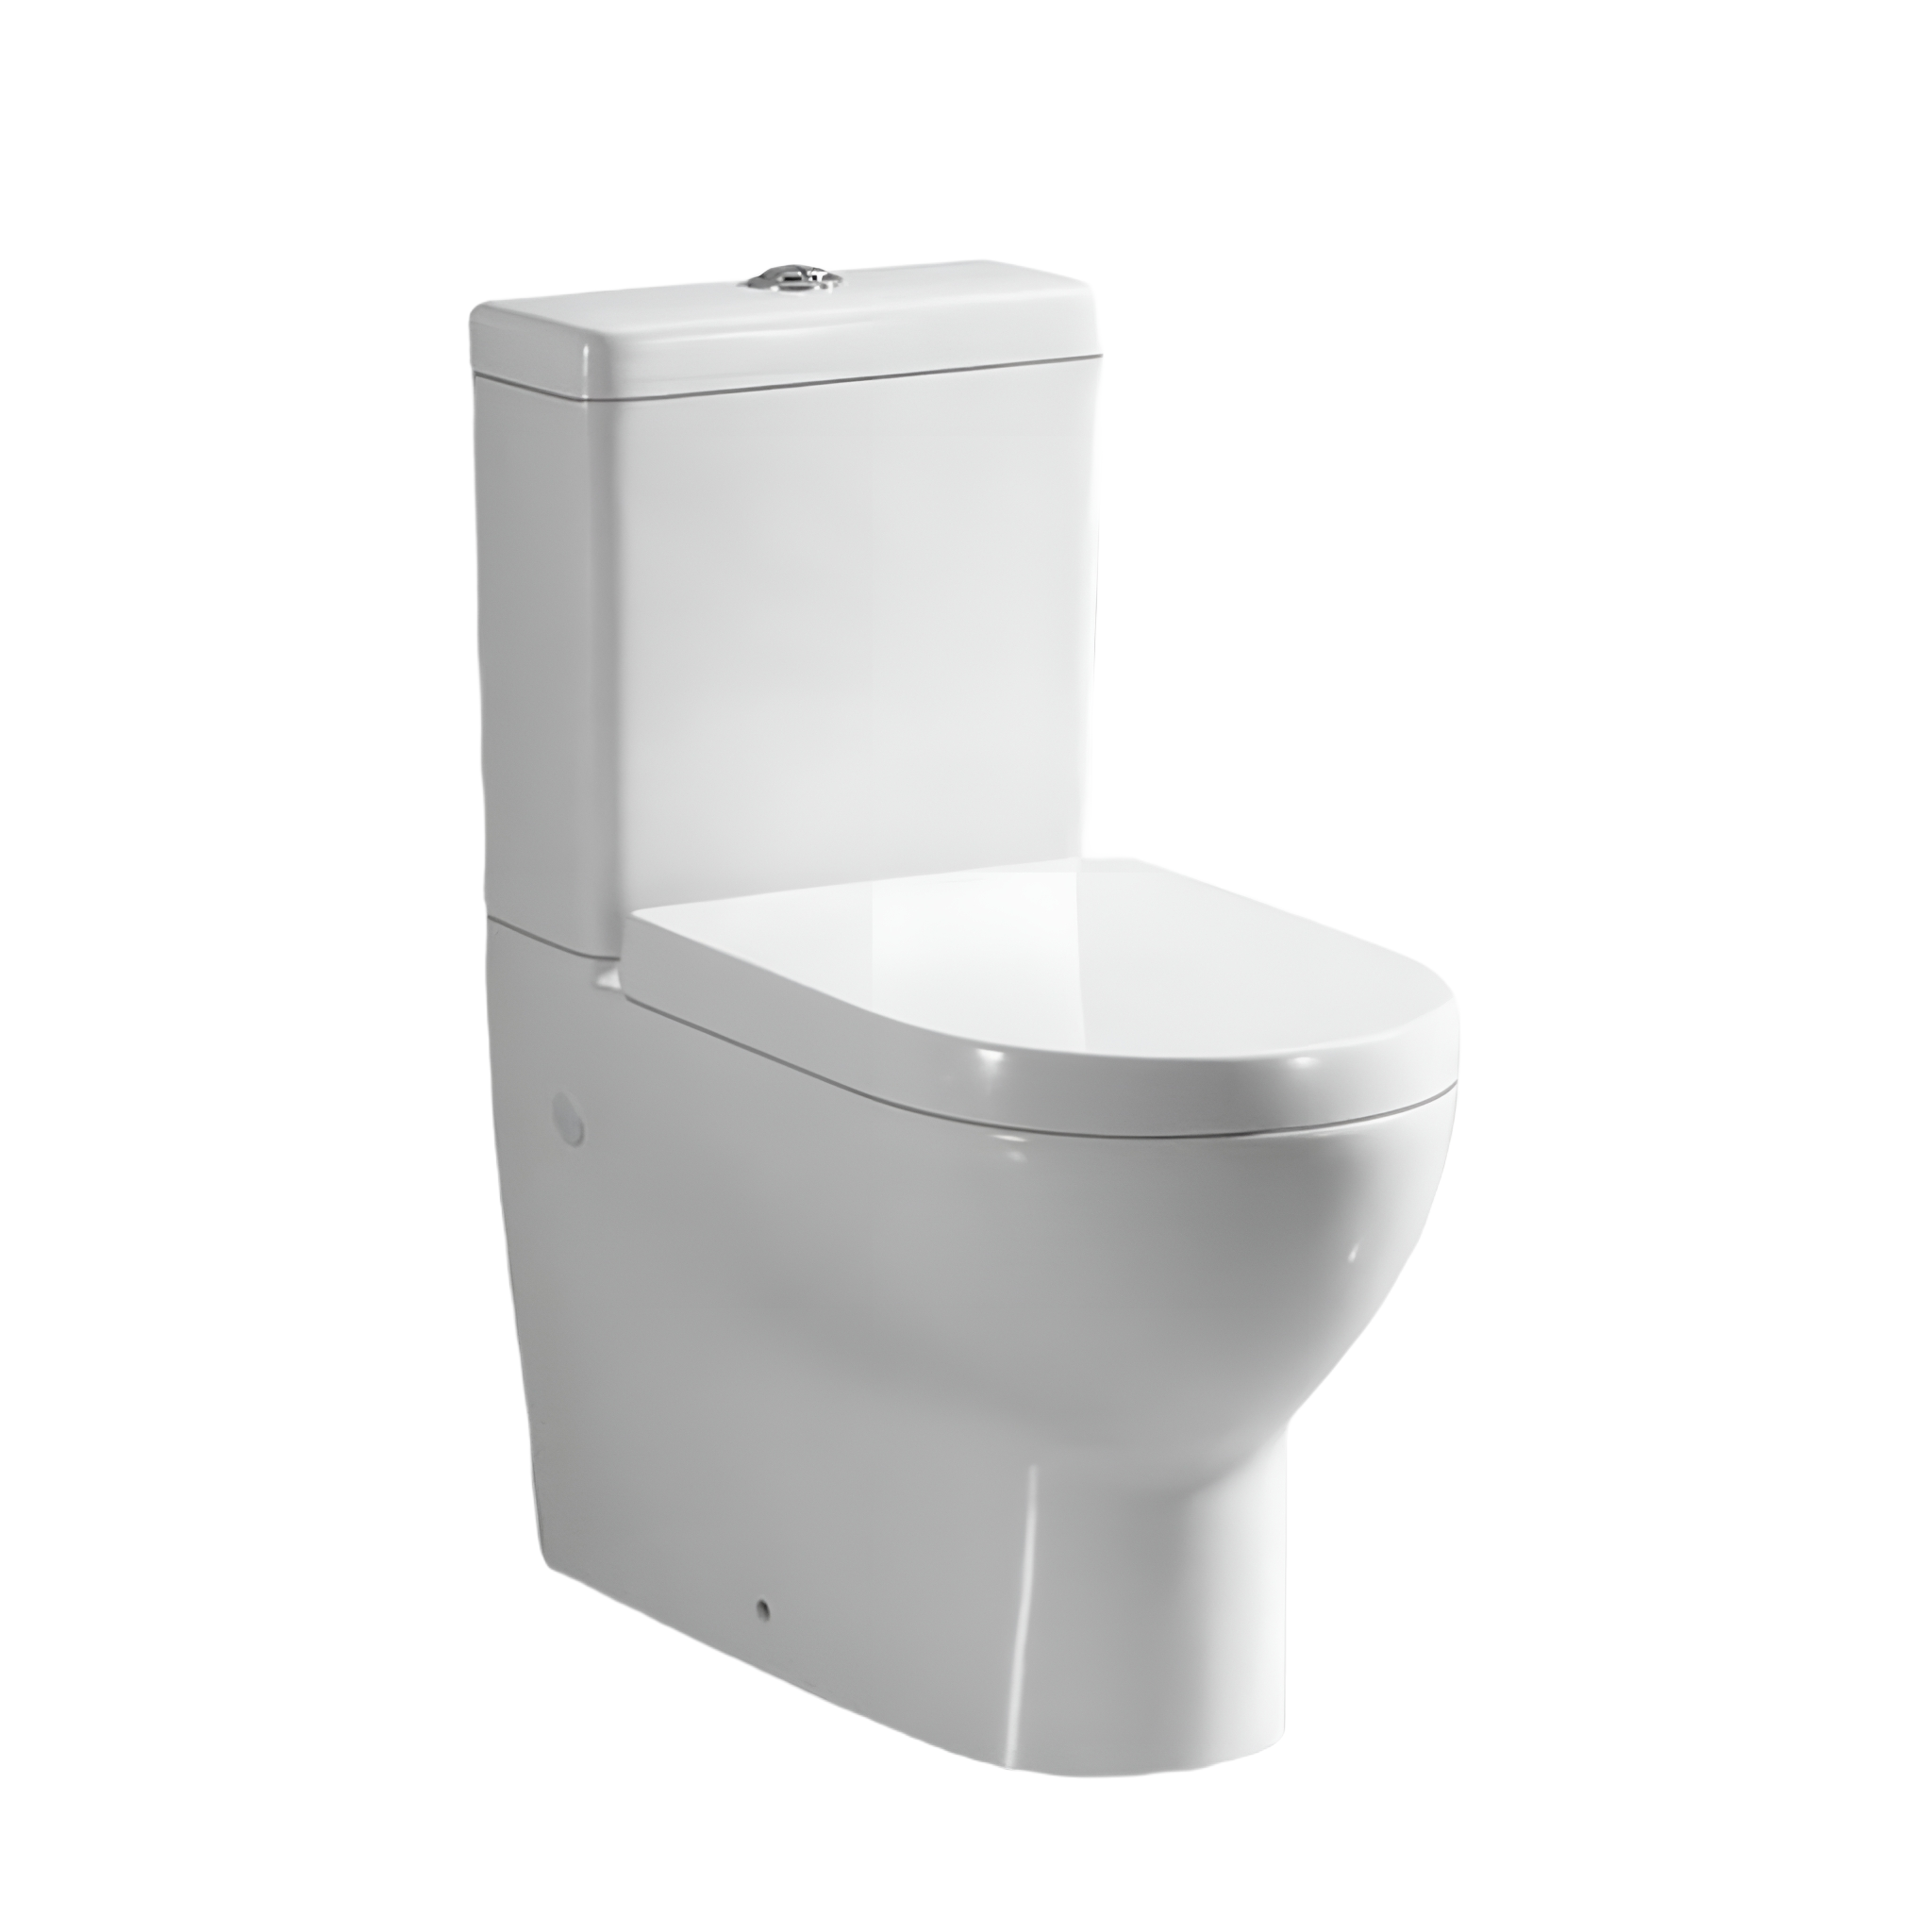 TURNER HASTINGS HARTLEY CLOSE COUPLED BACK TO WALL TOILET SUITE GLOSS WHITE